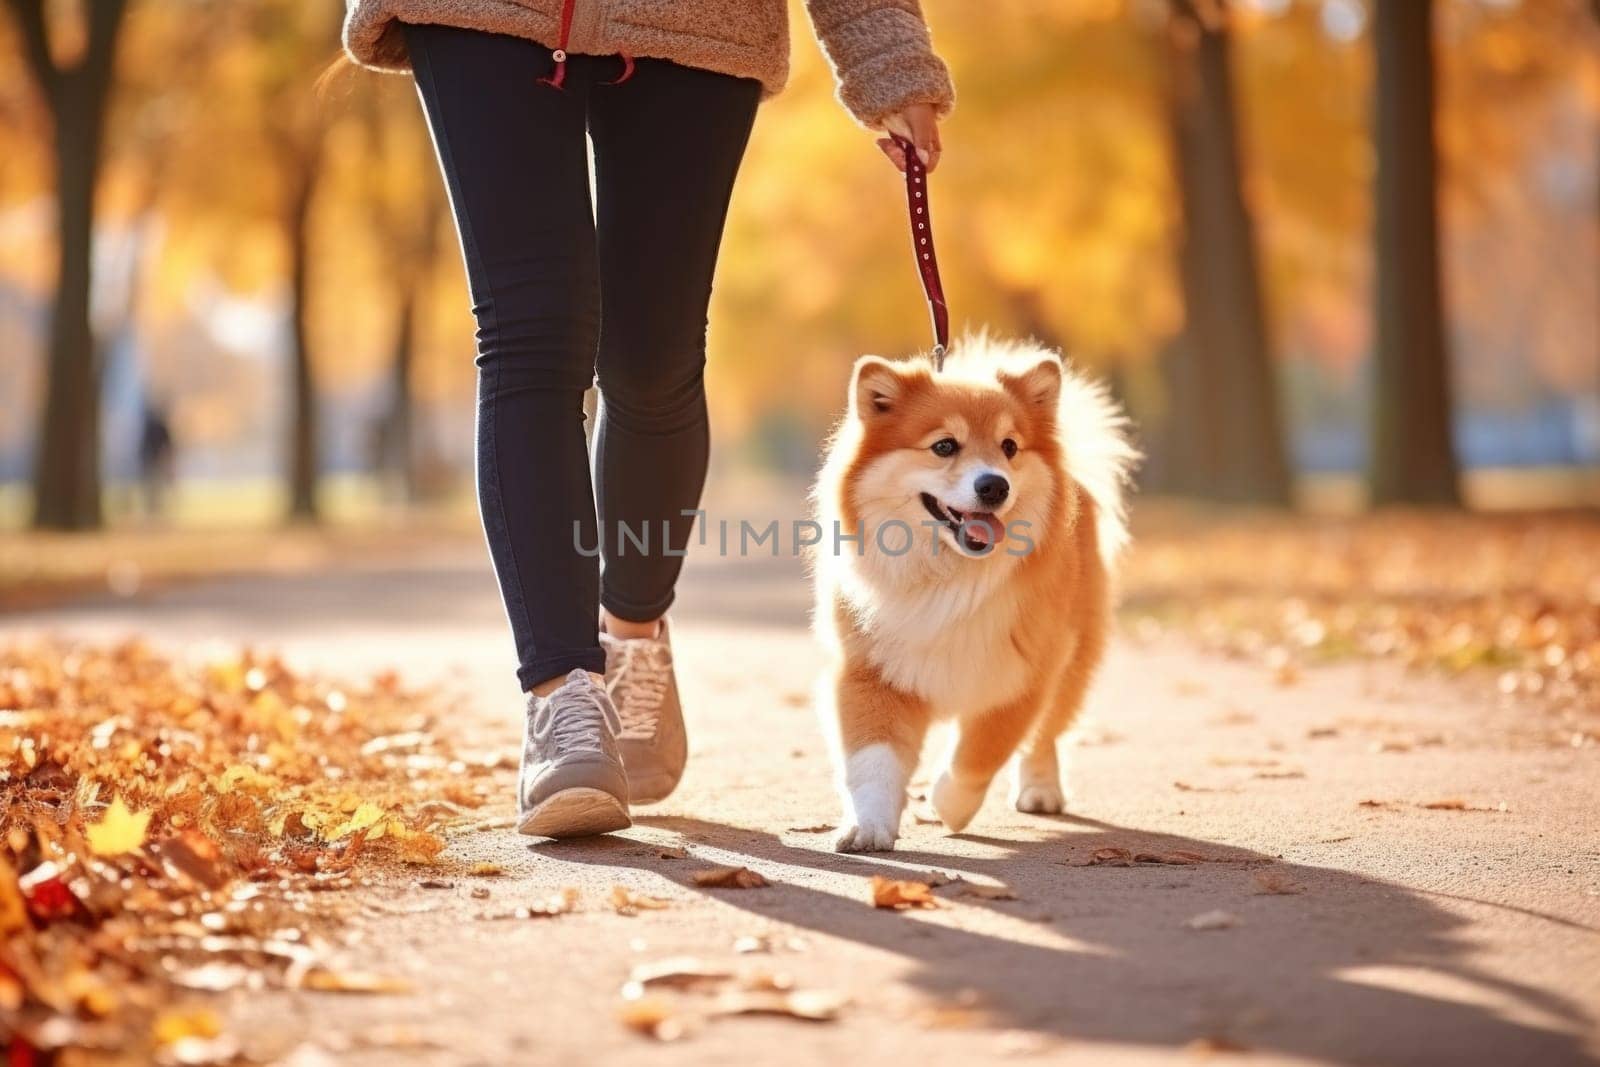 image of a person walking a pet dog in a city park on a sunny autumn day.